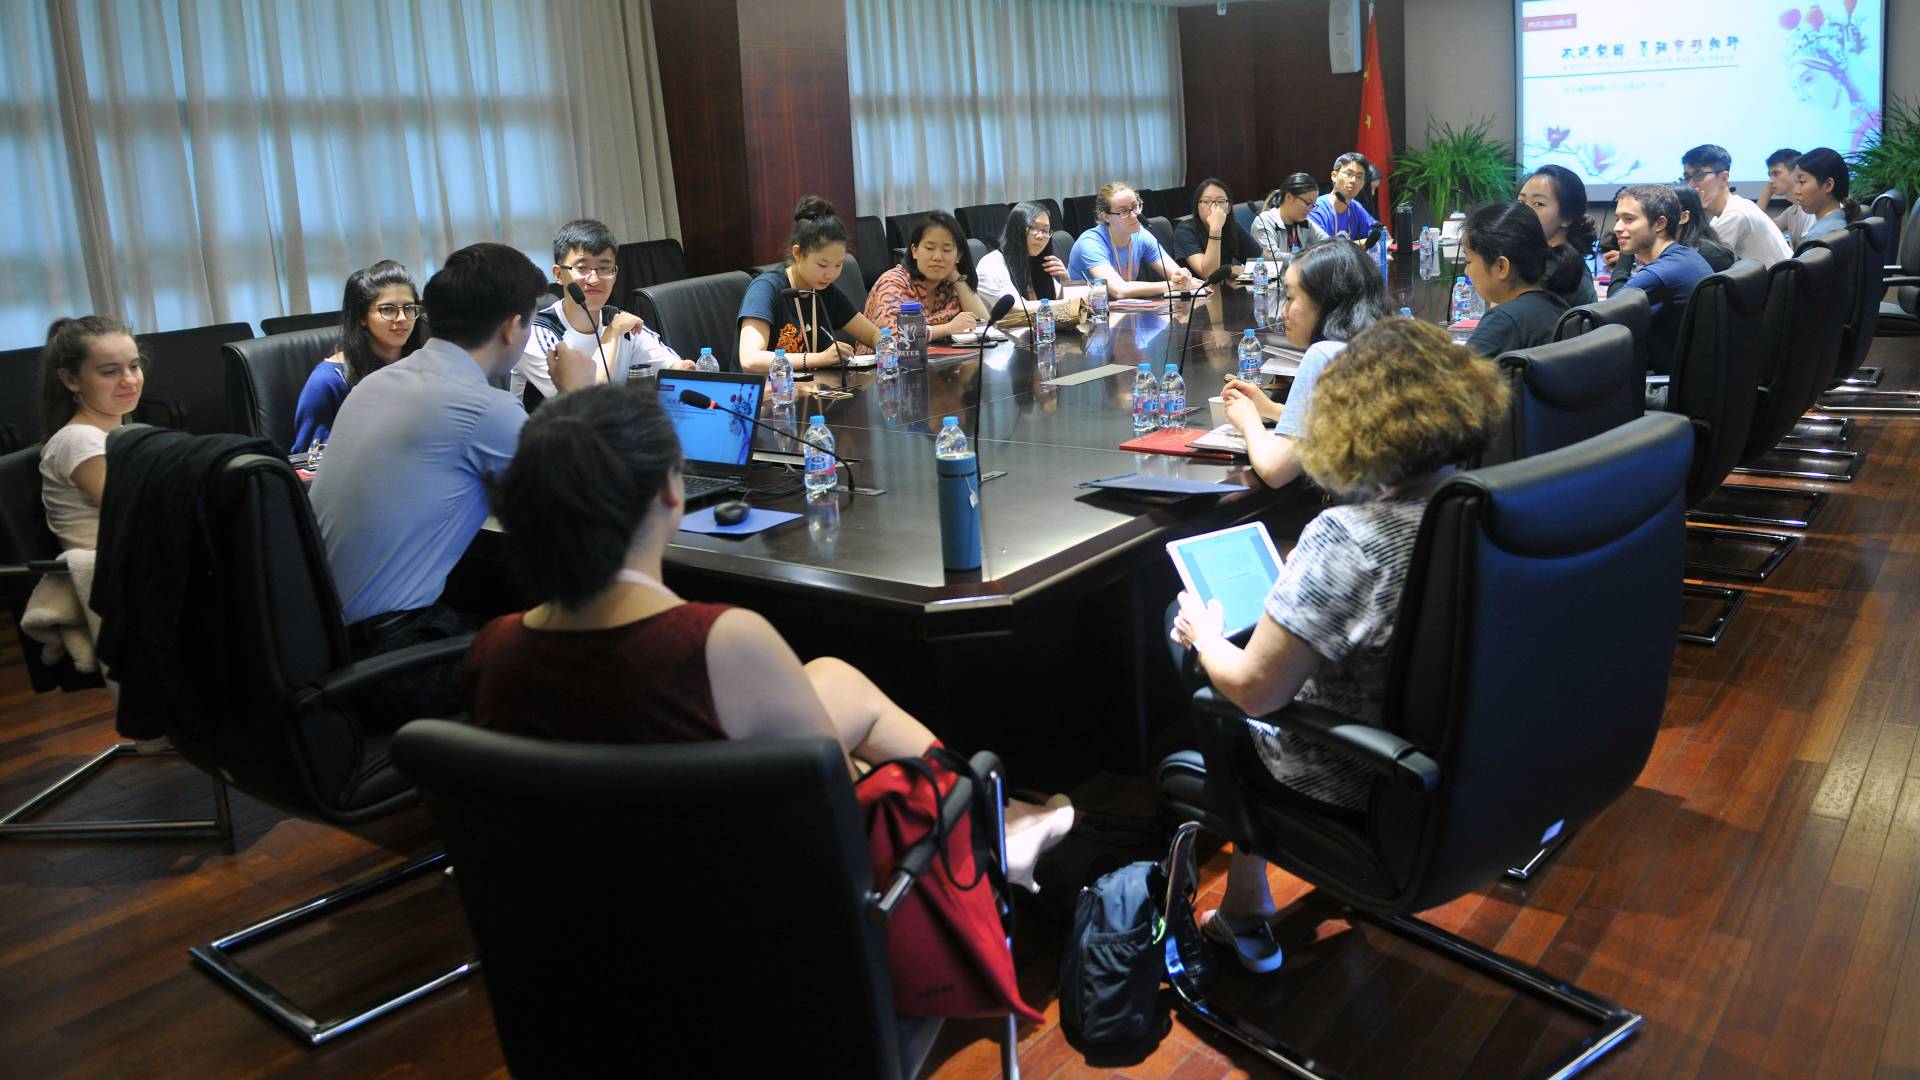 Students and guest sitting at conference table